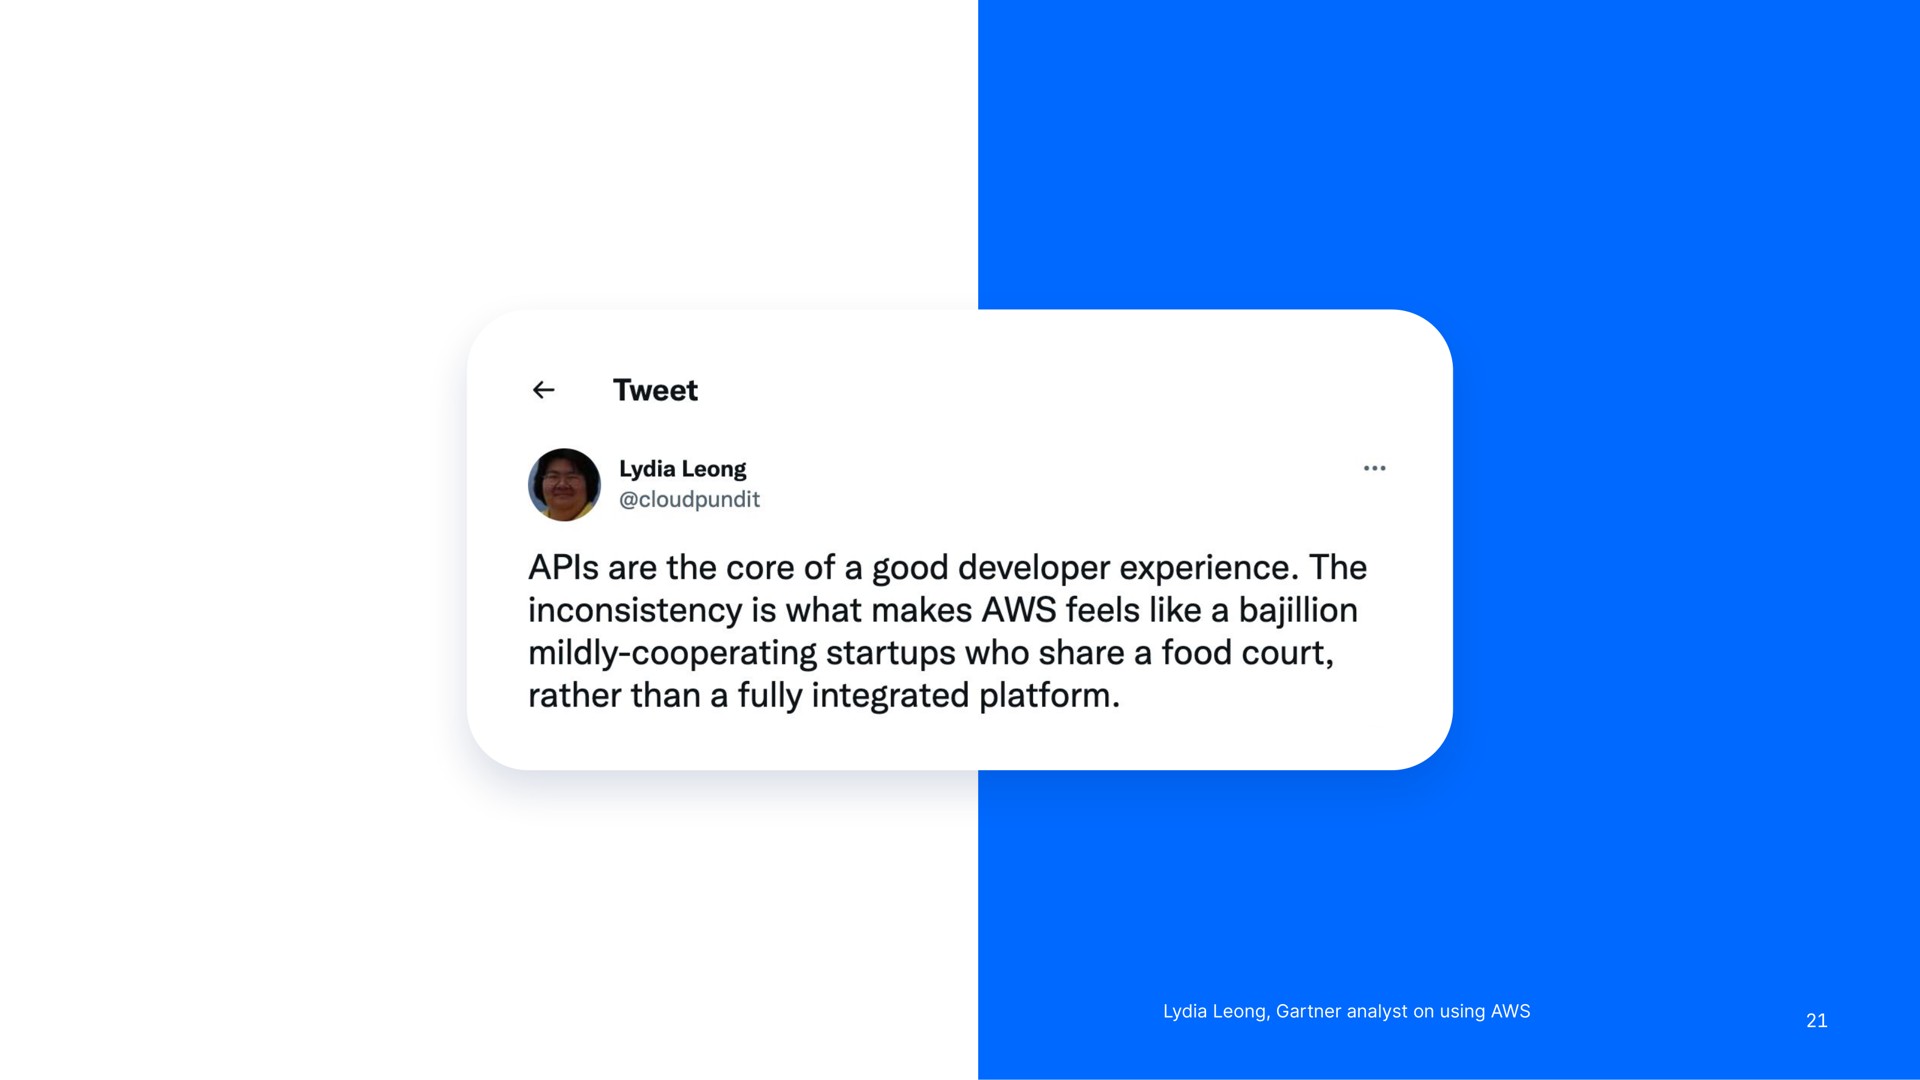 tweet are the core of a good developer experience the inconsistency is what makes feels like a mildly who share a food court rather than a fully integrated platform | DigitalOcean